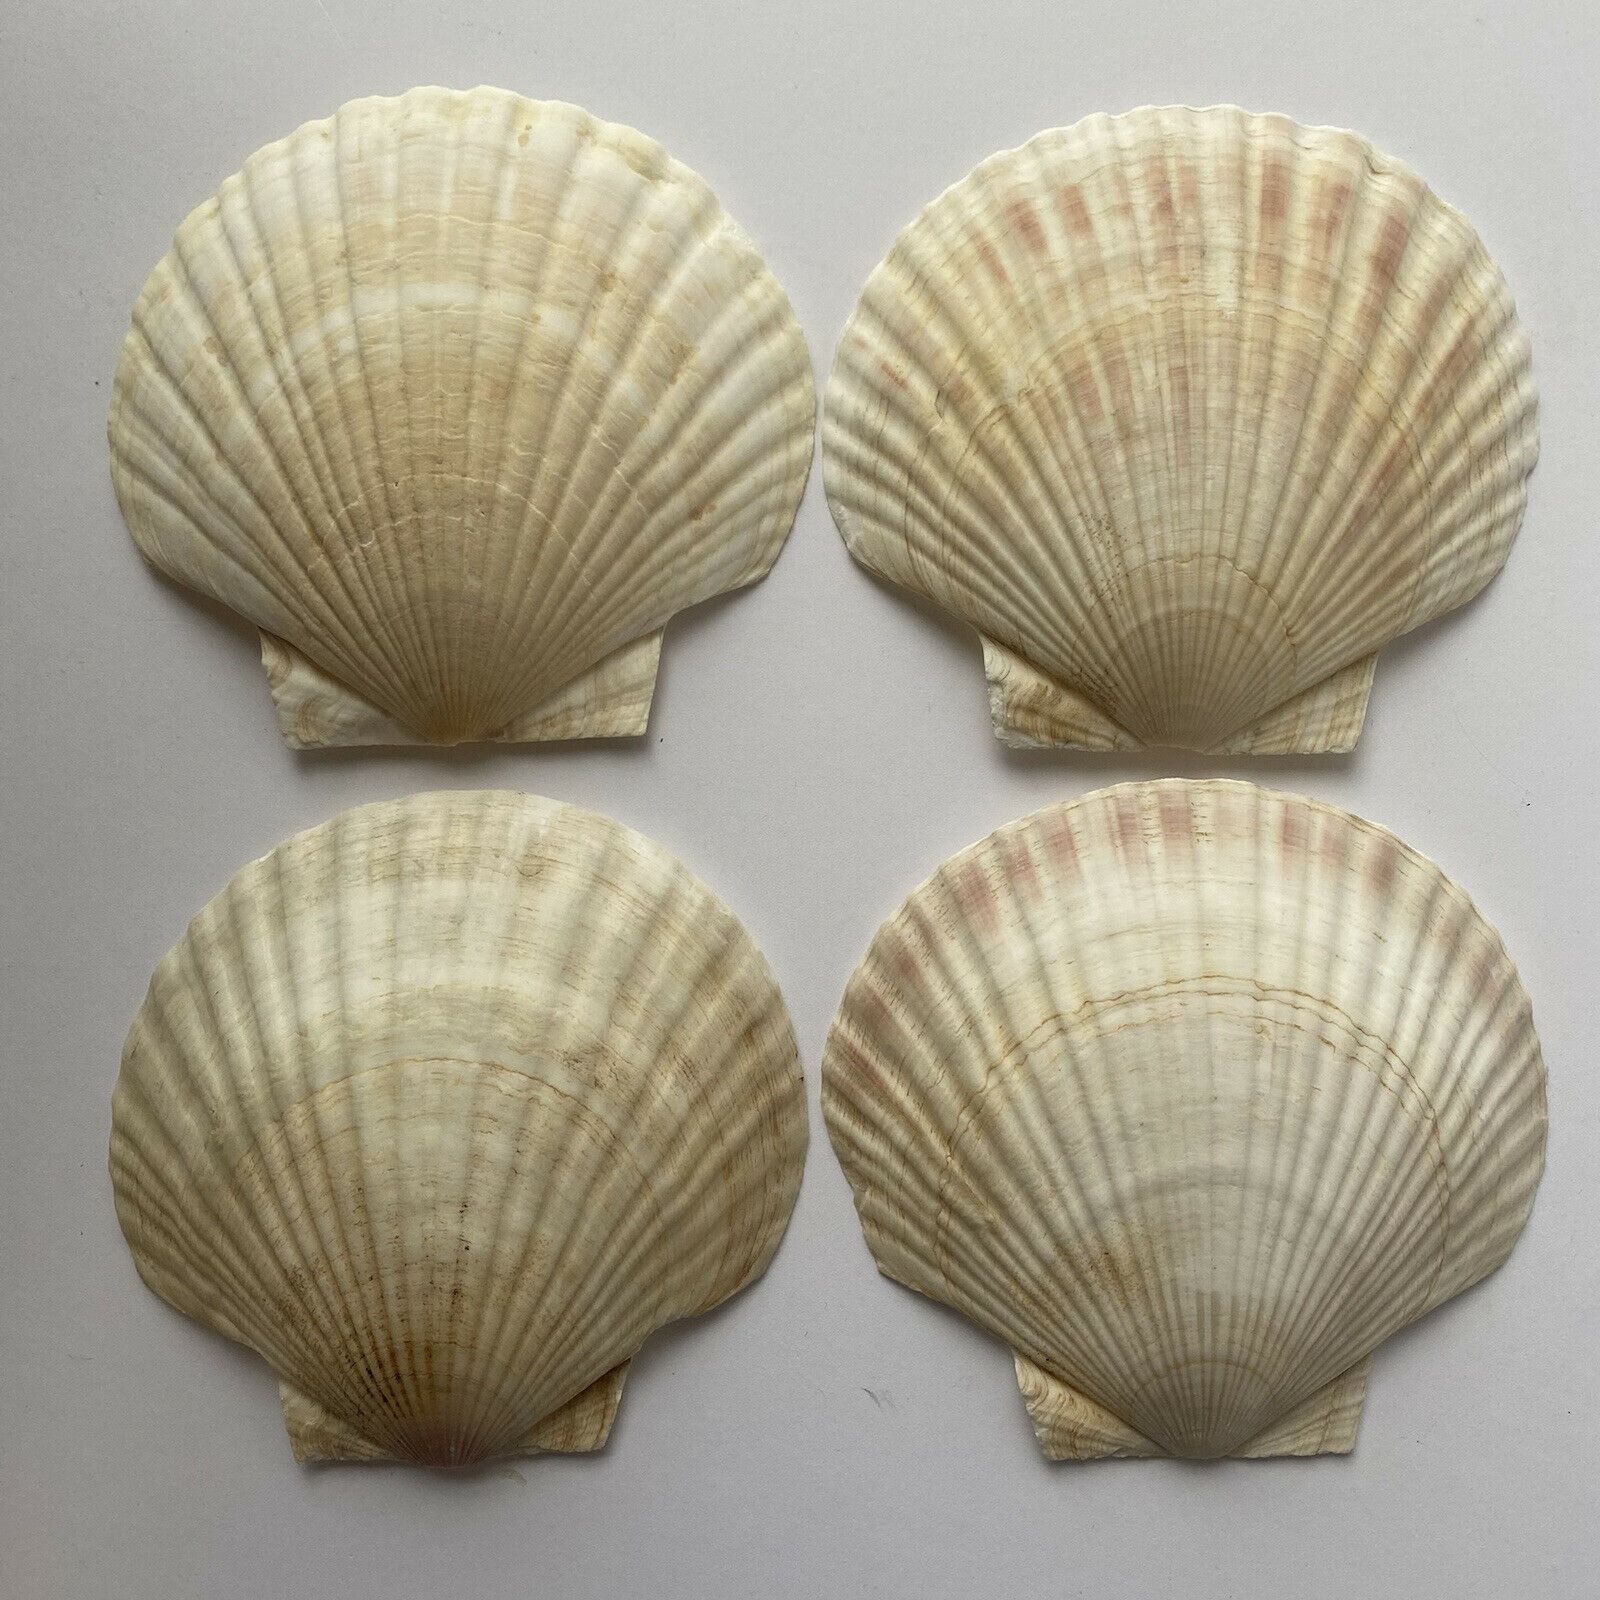 (4) Large ~6" Sea Scallop Shells White/pink/orange/yellow Hues For Crafts Decor